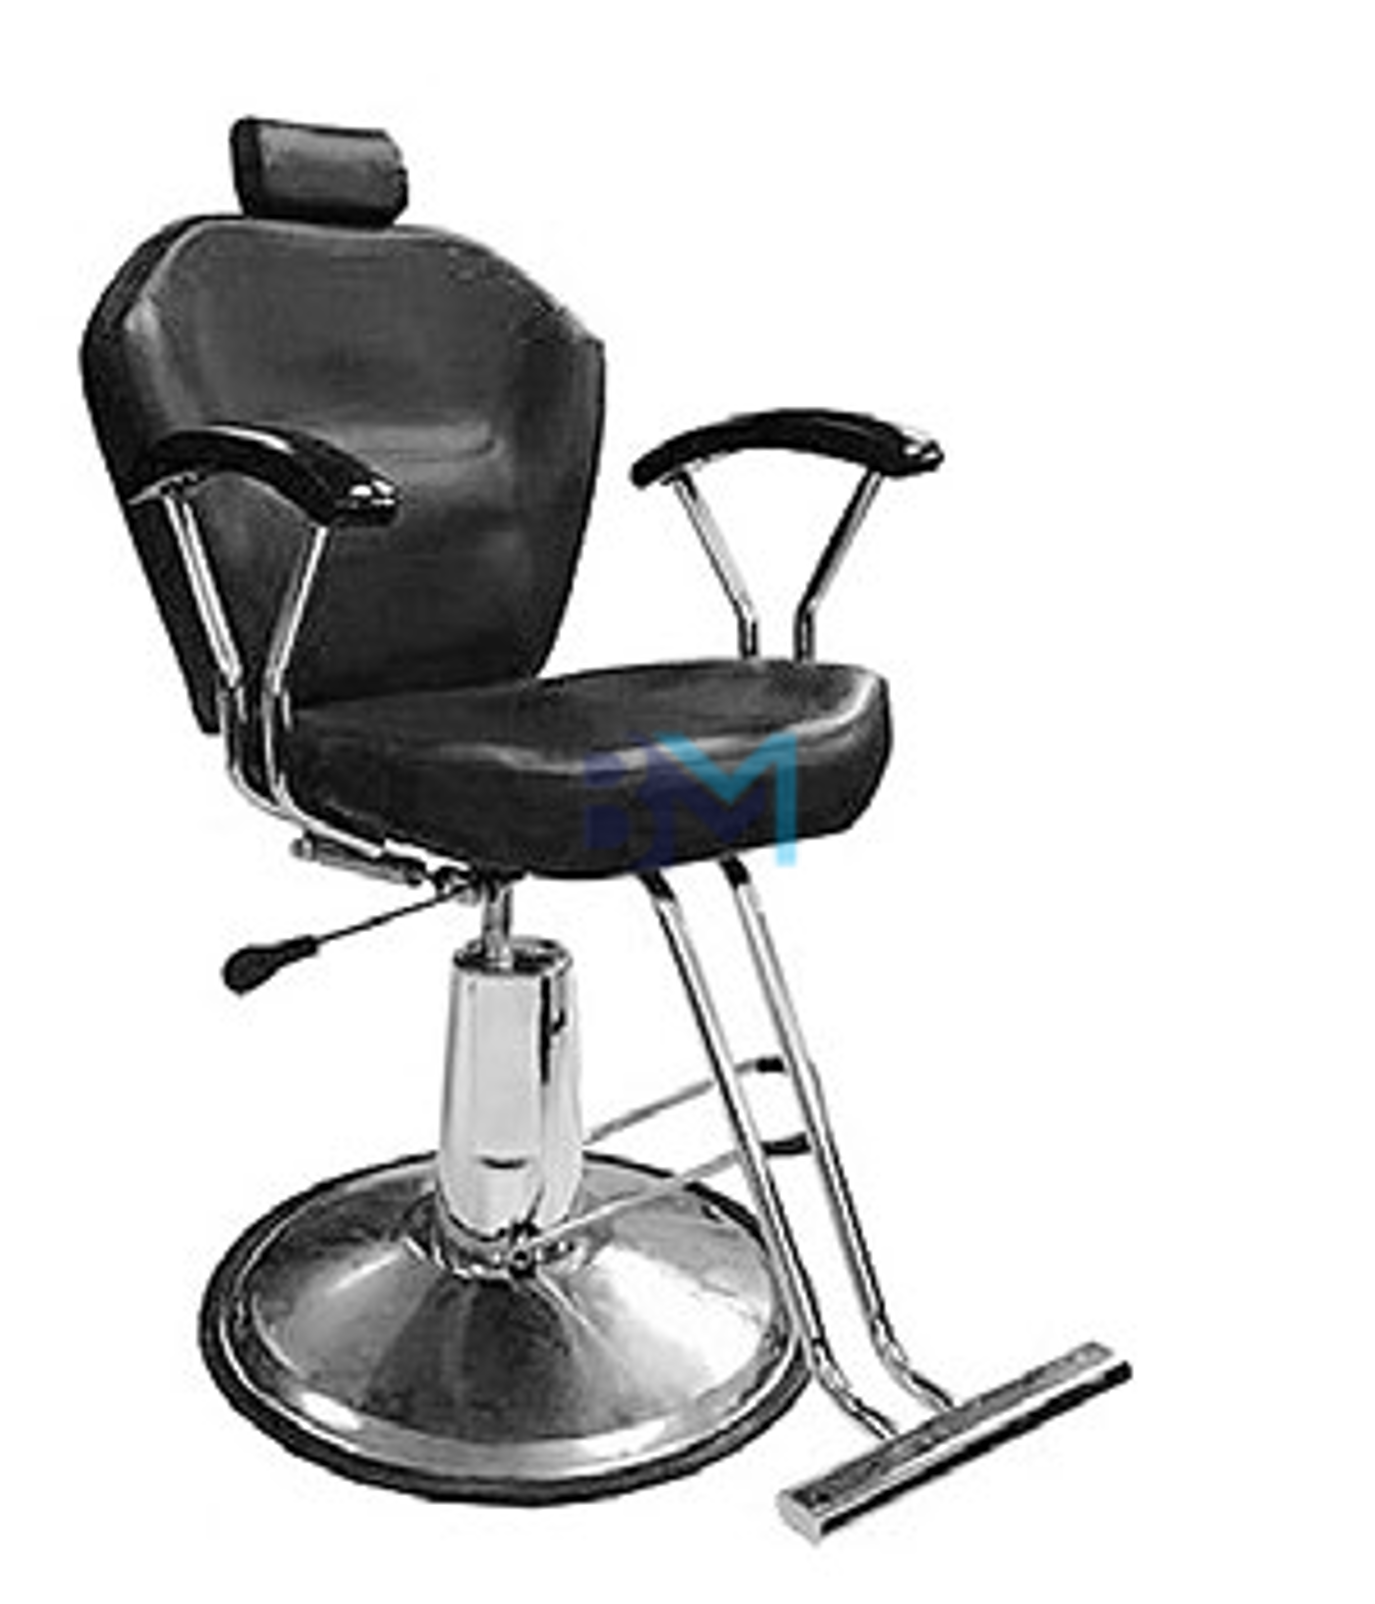 Classic black barbershop and hairdresser chair